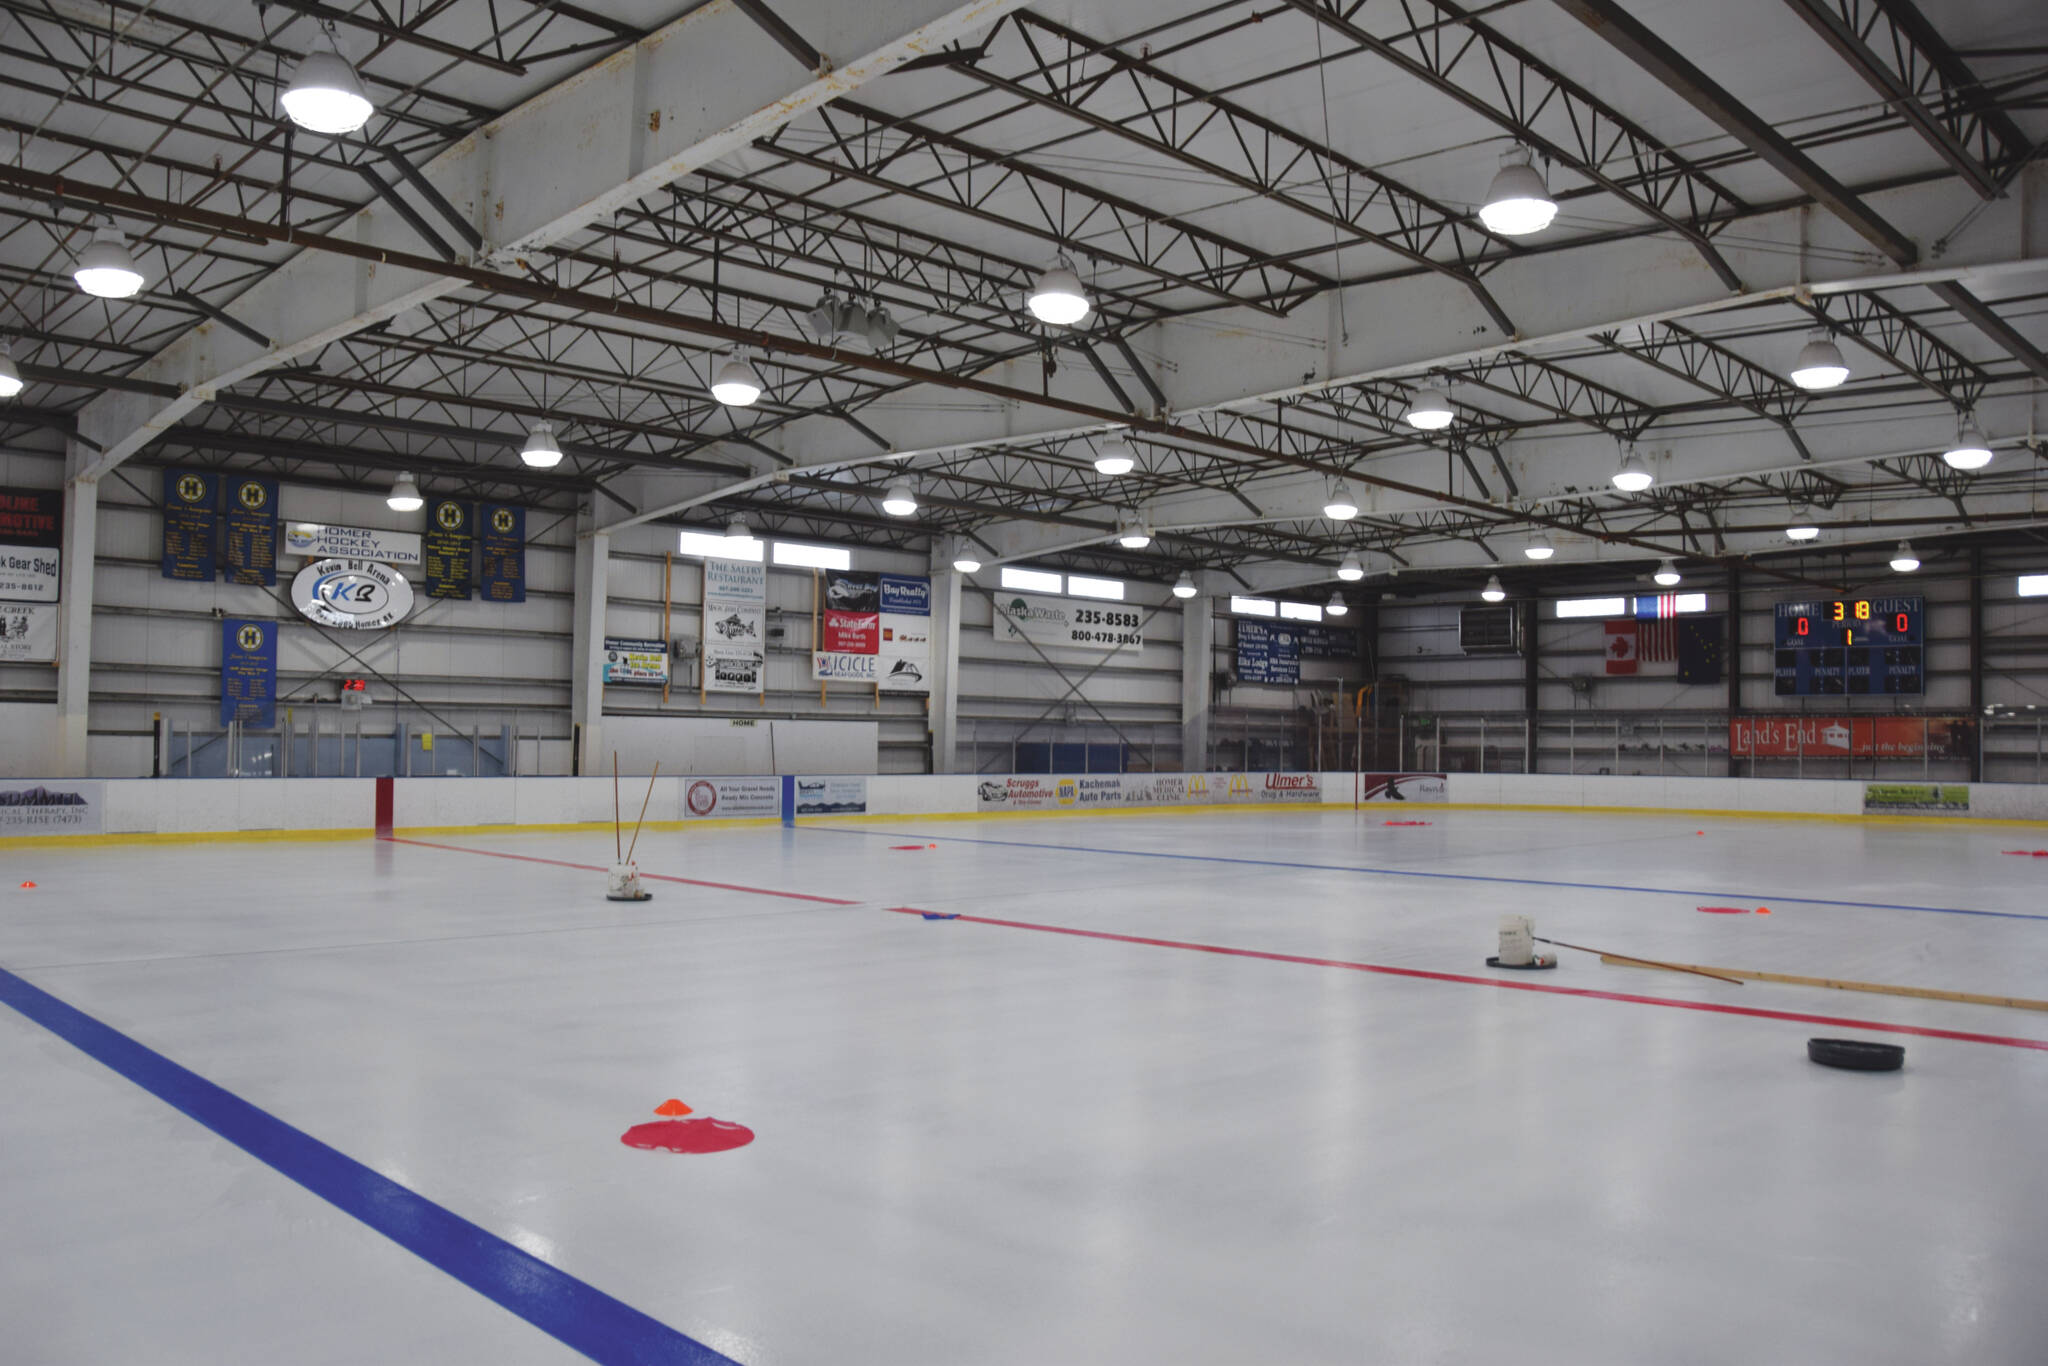 The Kevin Bell Arena ice rink is photographed on Sept. 29, 2022, in Homer, Alaska. (Photo by Charlie Menke/Homer News)